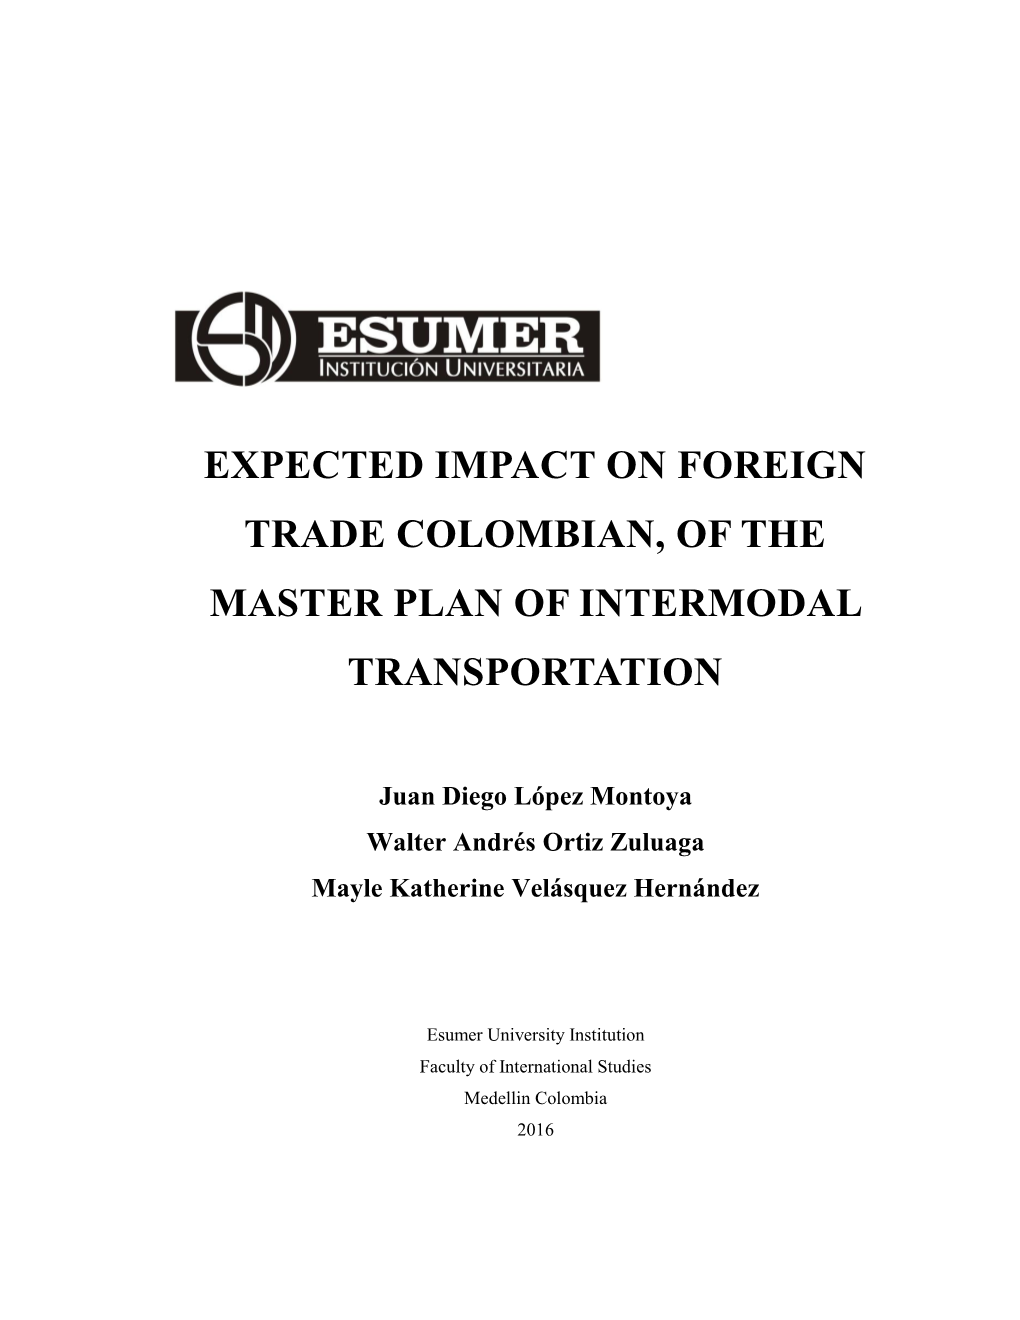 Expected Impact on Foreign Trade Colombian, of the Master Plan of Intermodal